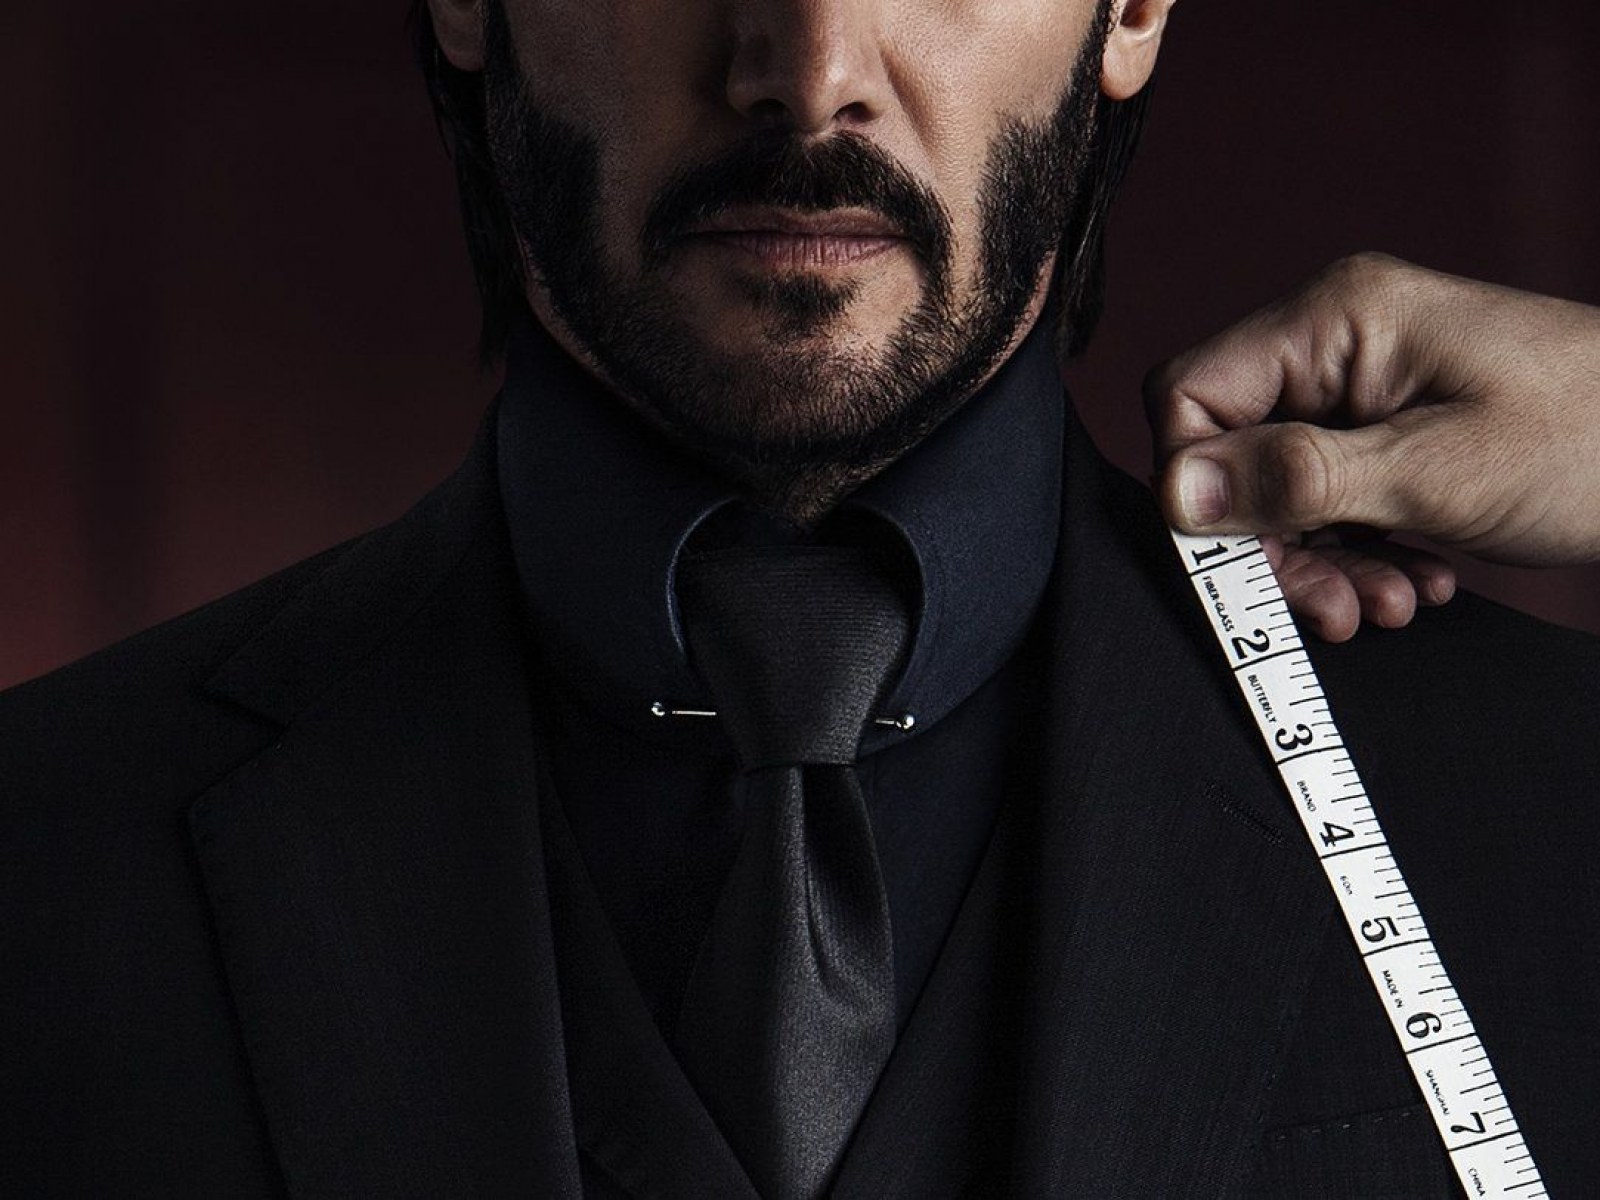 Why Keanu Reeves Needed 180 Suits For 'John Wick 3'